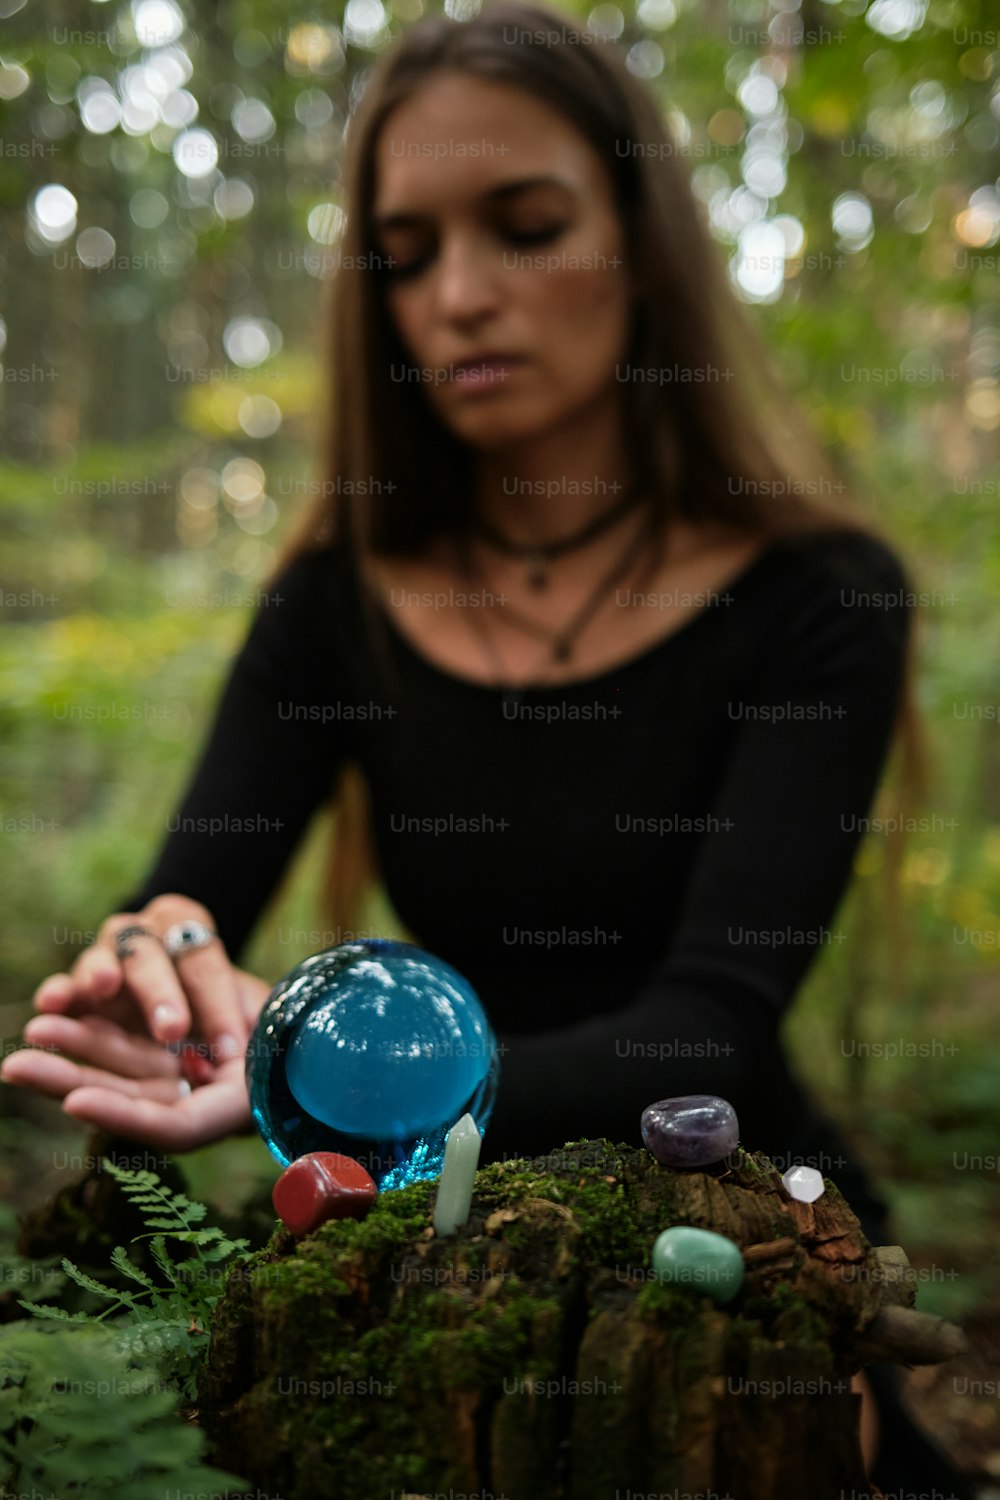 a woman in a black shirt is holding a blue ball